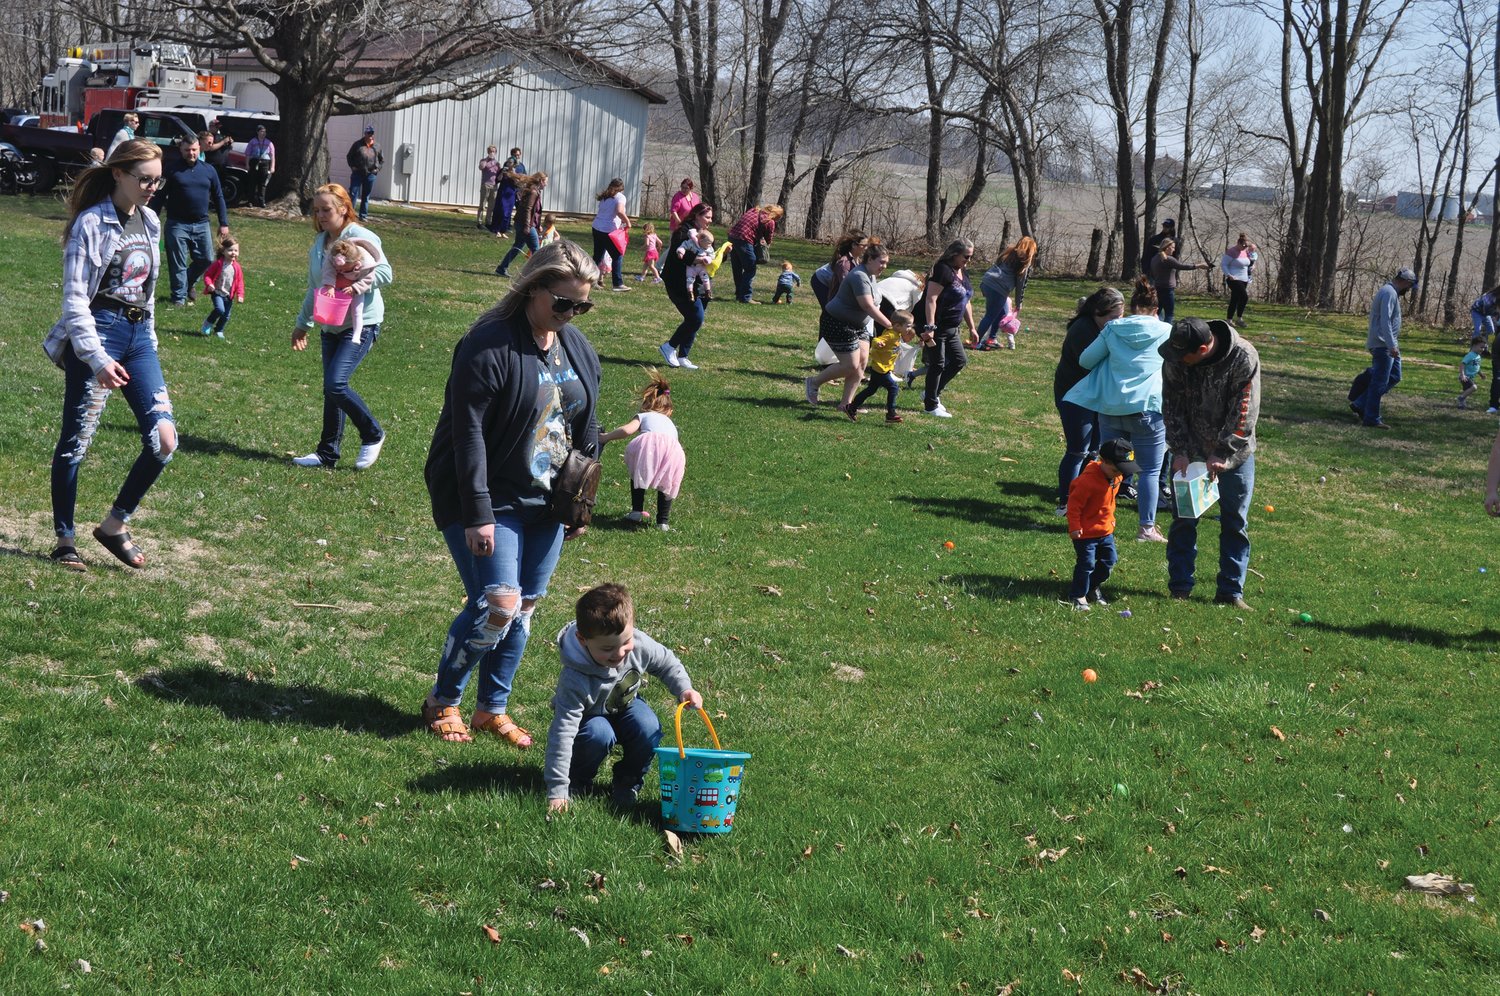 Families hunt Easter eggs at Tremaine Park in Waynetown Saturday. The egg hunt was sponsored by the Waynetown Merchants Association.